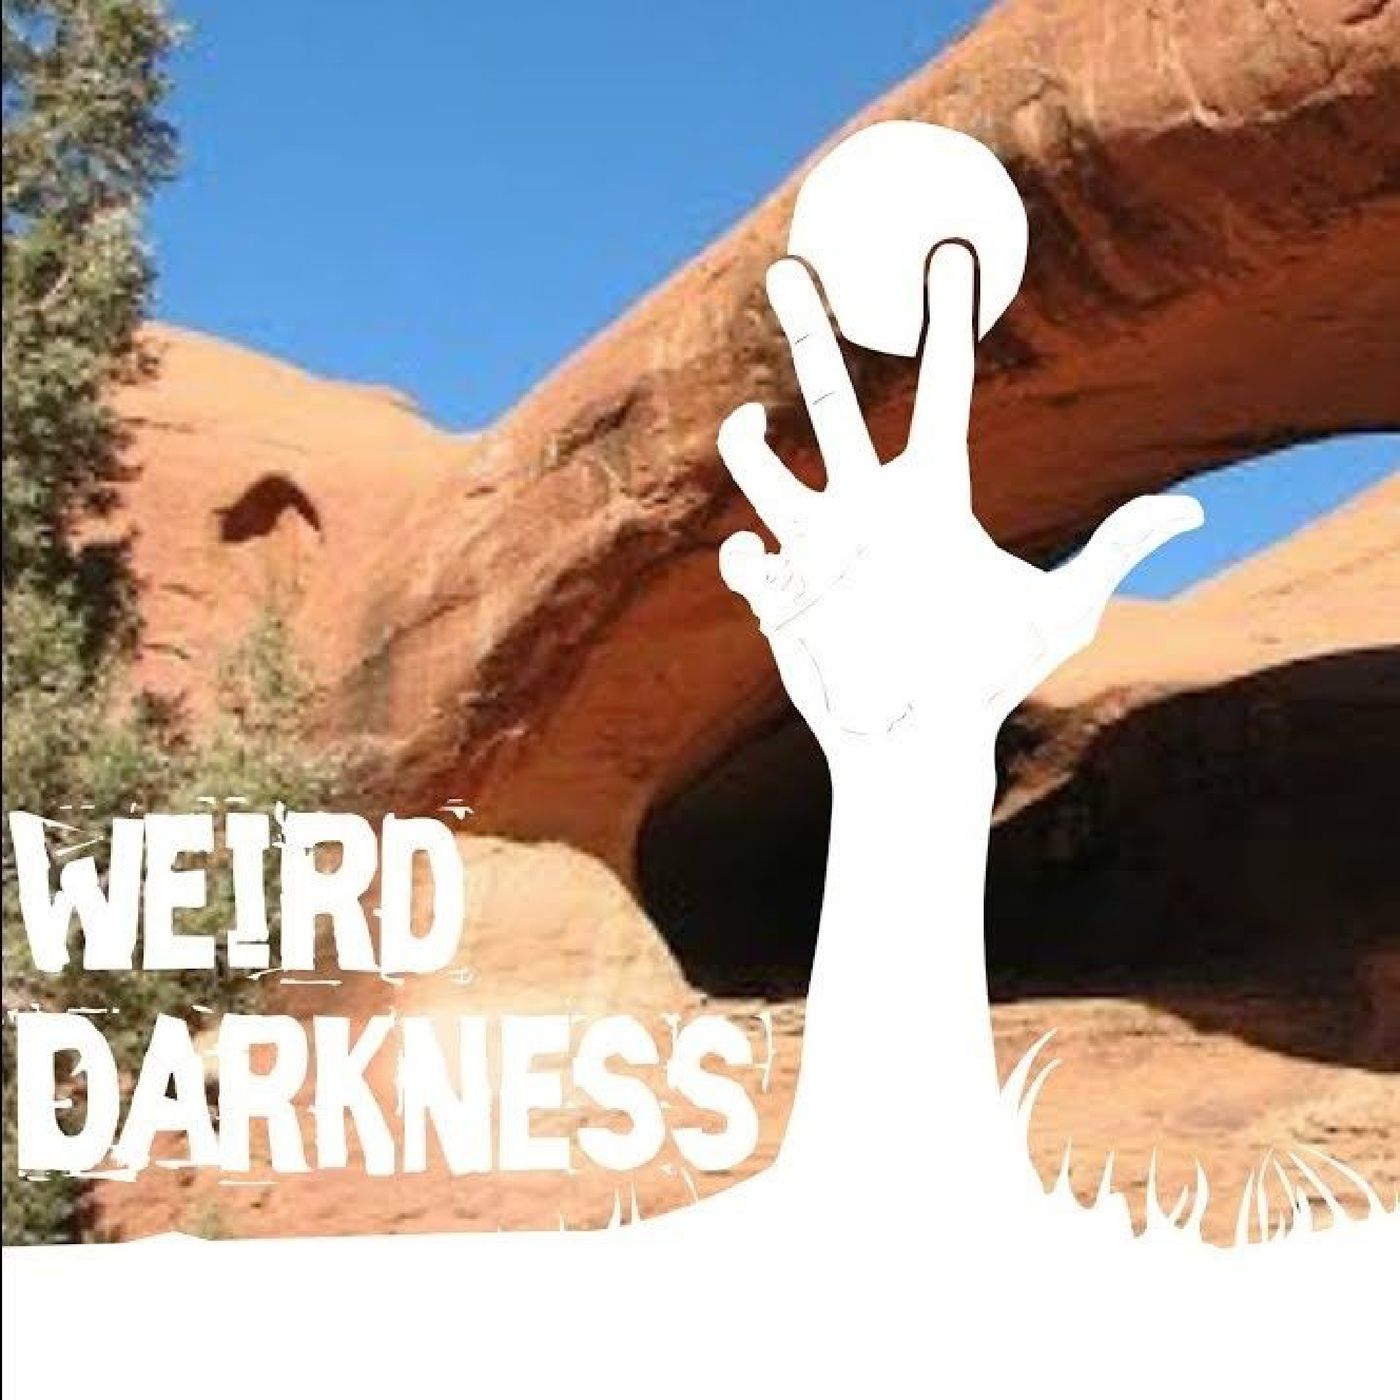 “IS THERE AN INTER-DIMENSIONAL TIME PORTAL IN ARIZONA?” and More Paranormal Stories! #WeirdDarkness